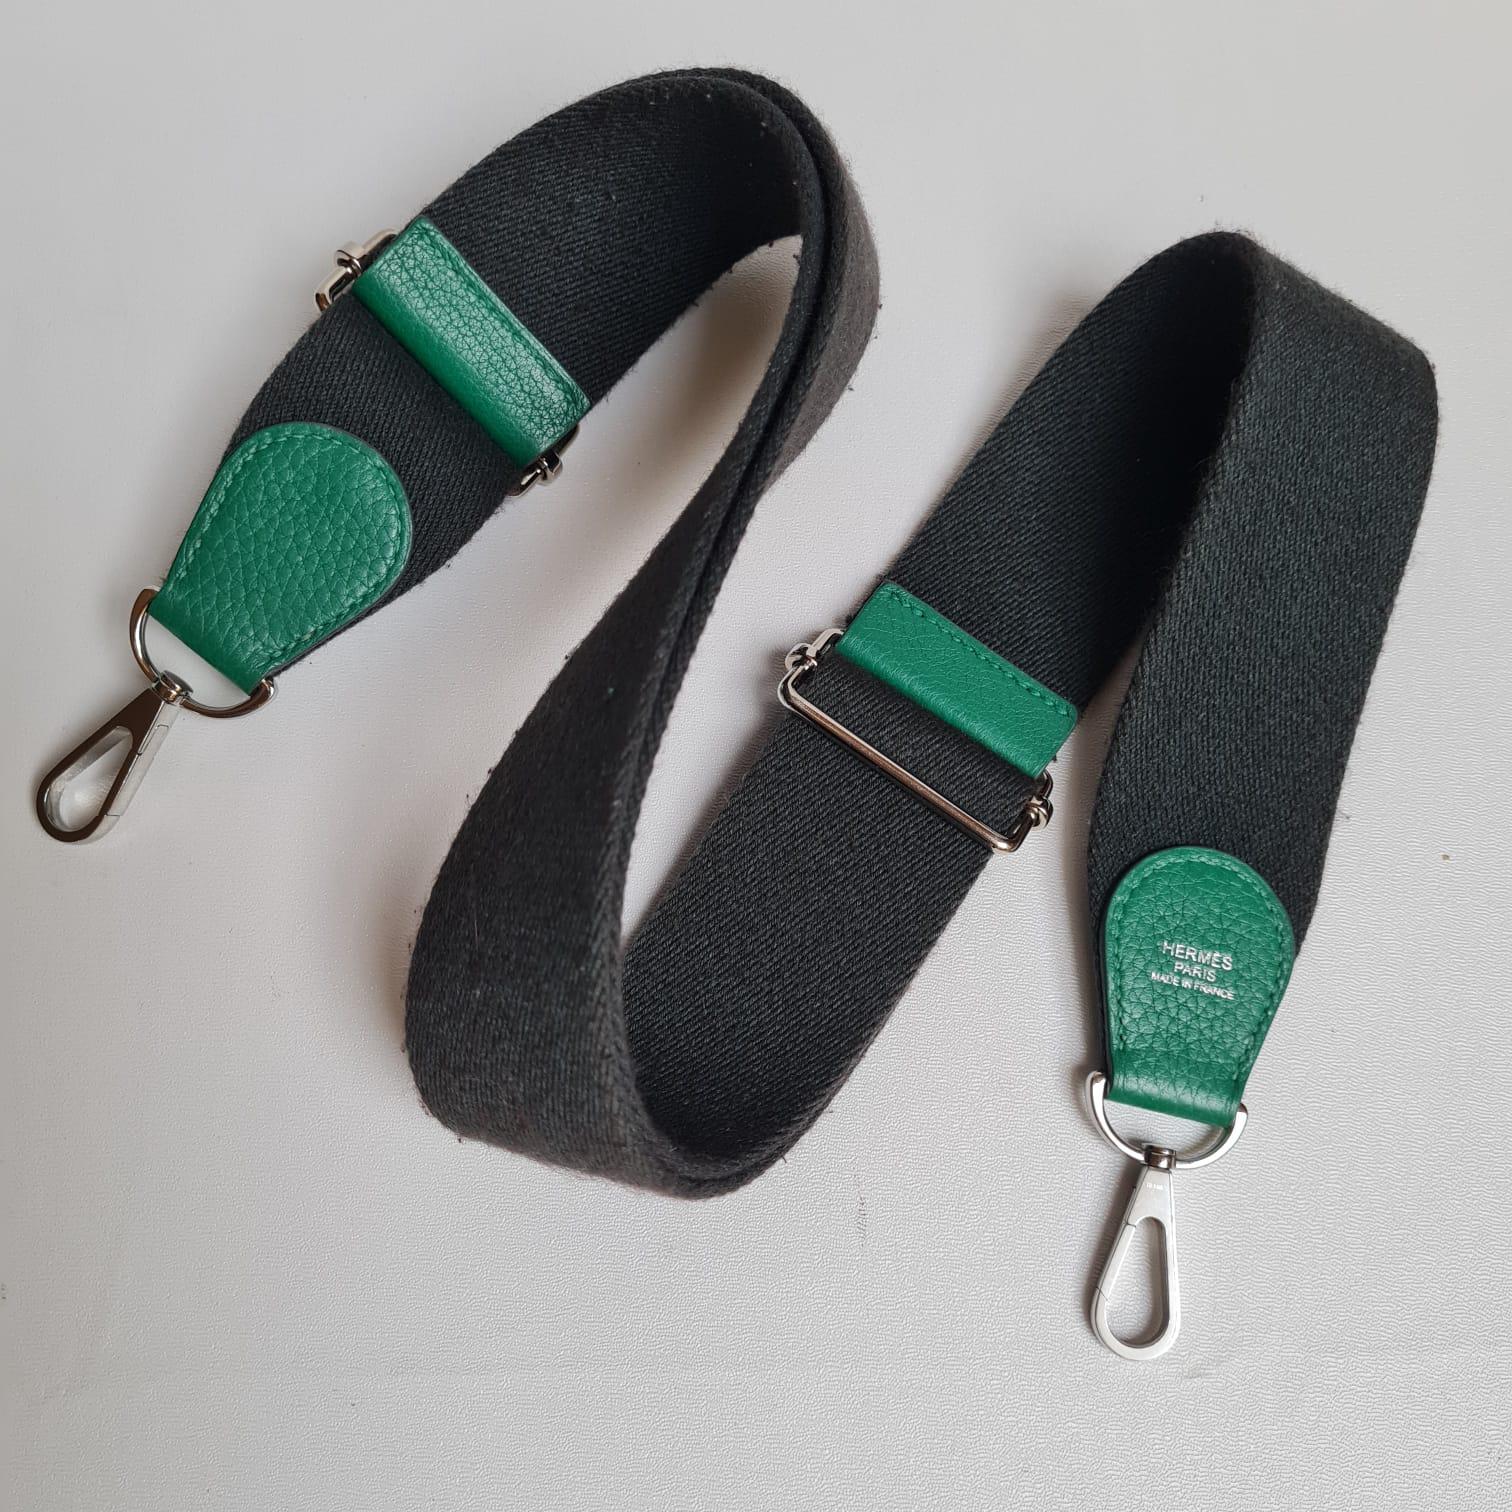 Beautiful evelyne pm III in vert bengale. Light rubbing marks on the button surface. Slight wear marks on the suede lining and outer pipelines, but overall still in great condition. Stamp A (2017). Comes with its dust bag, strap and entrupy